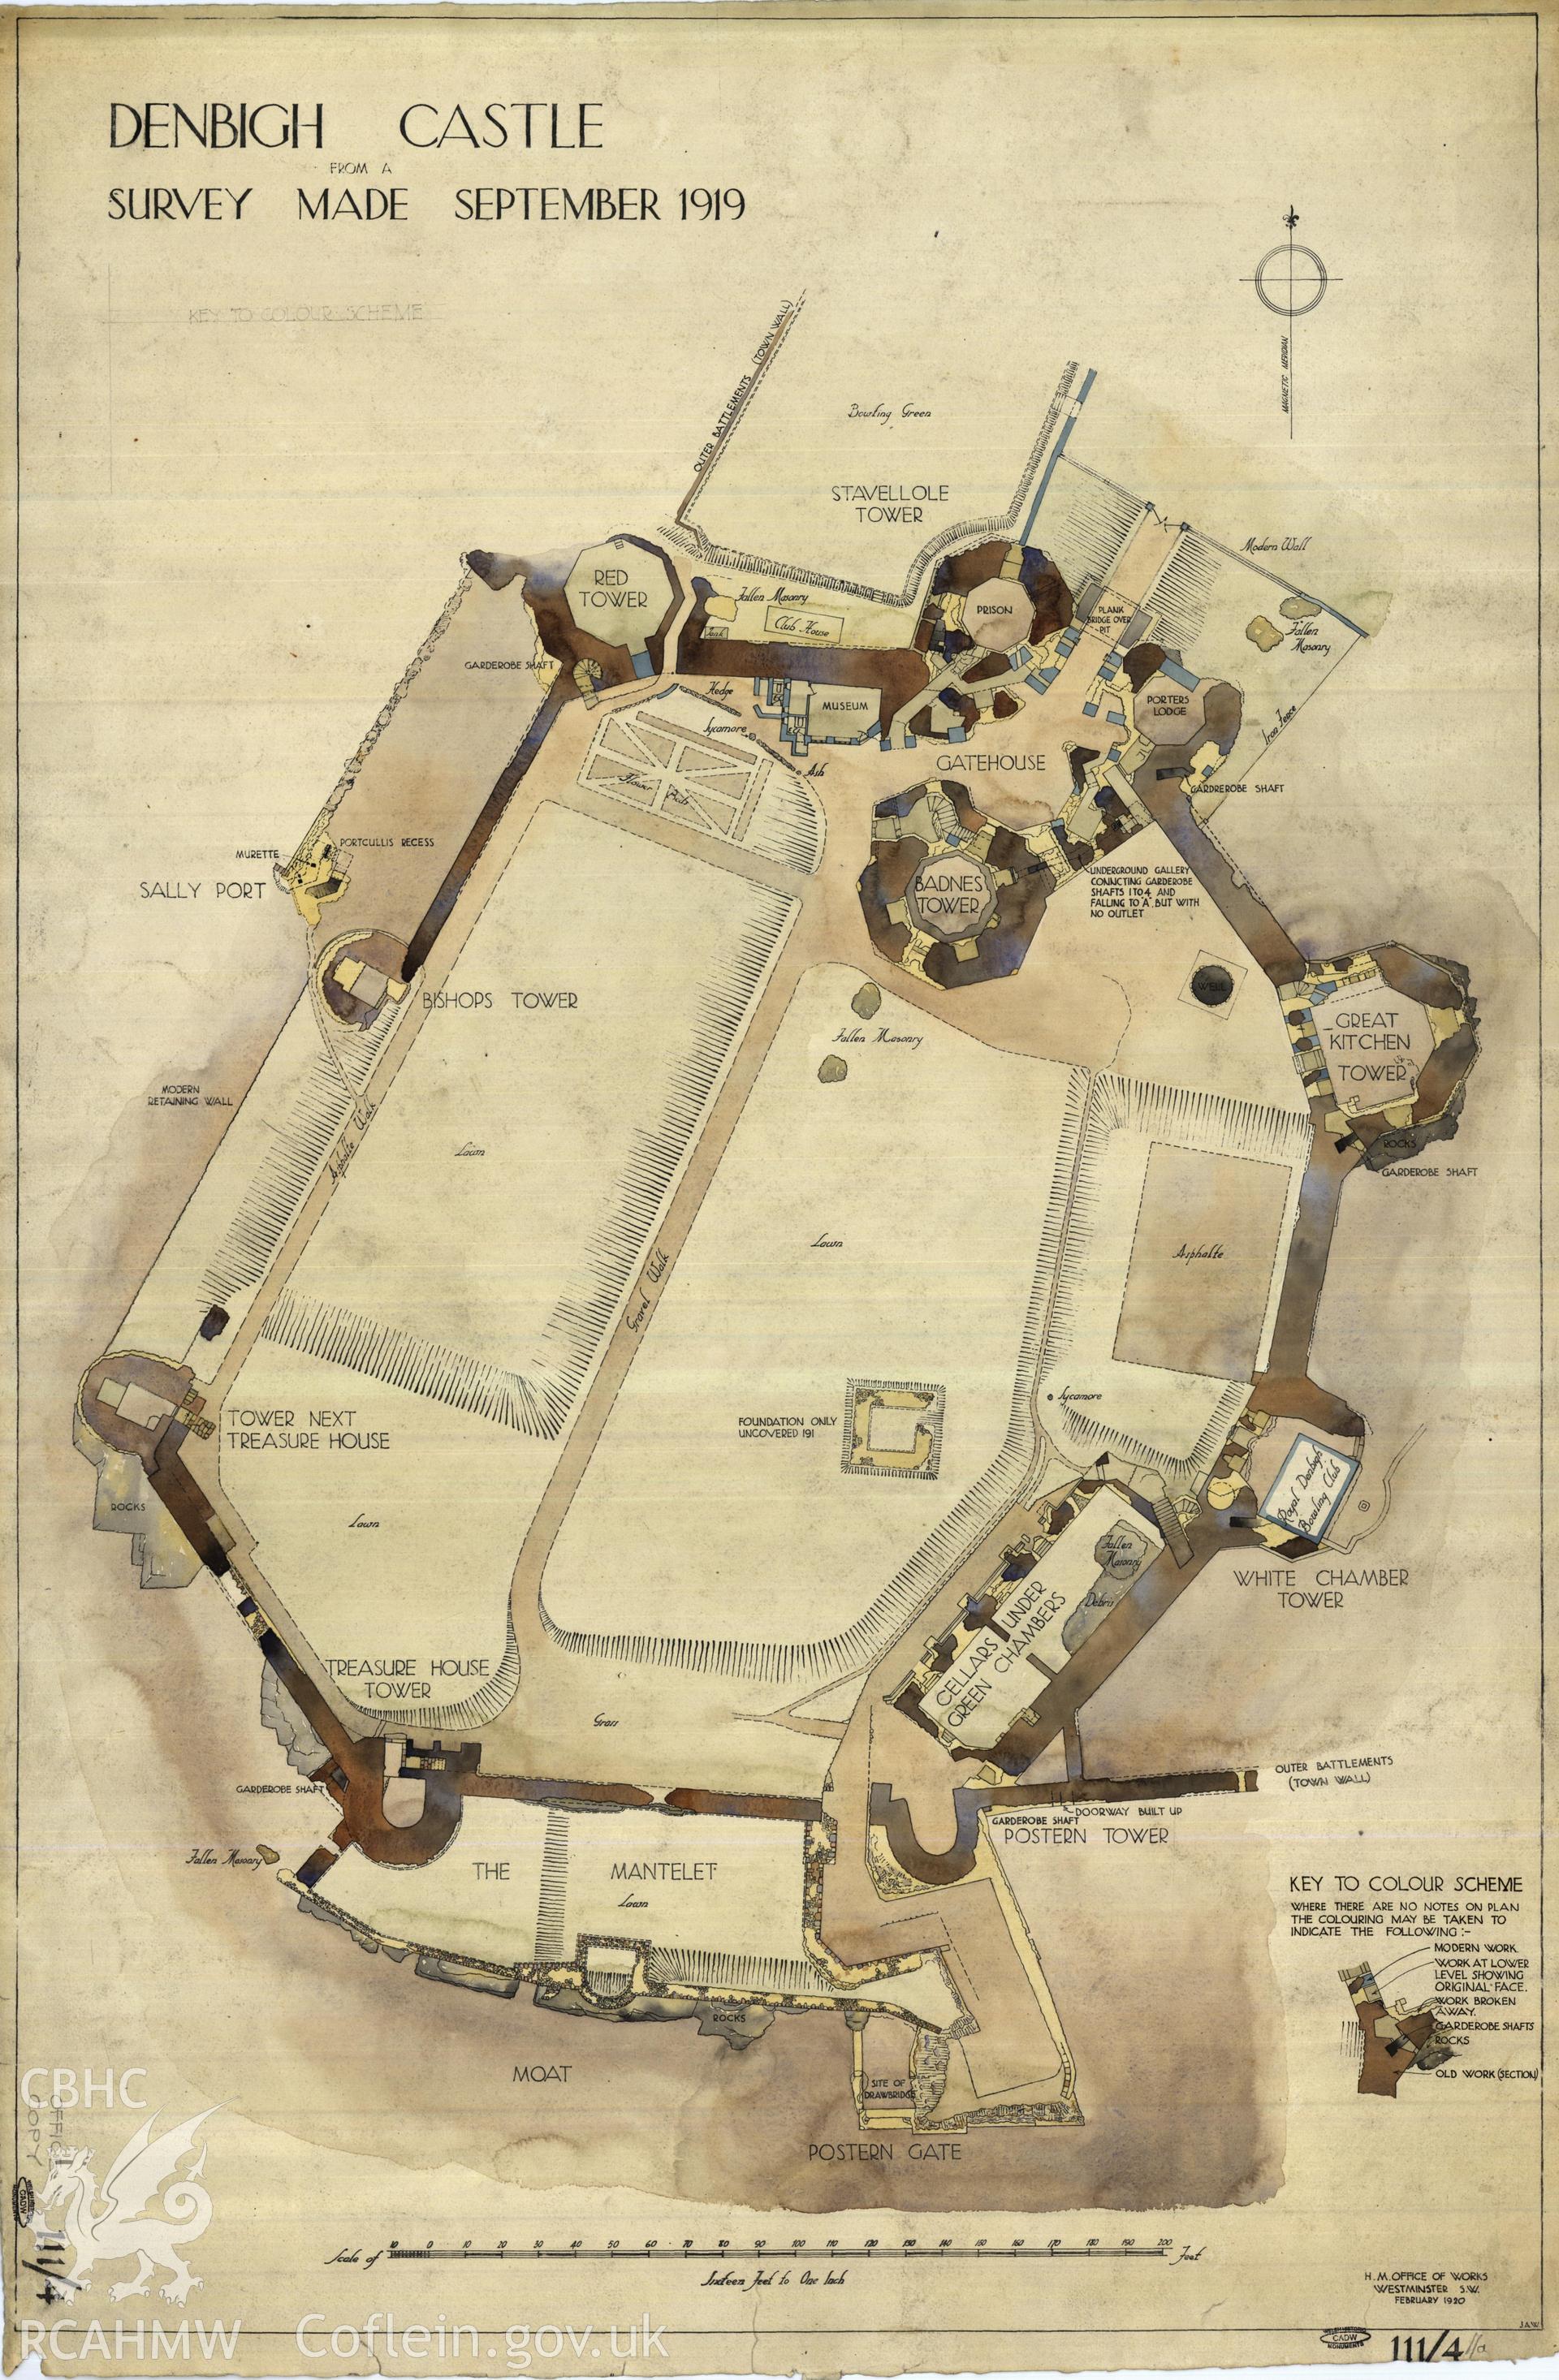 Cadw guardianship monument drawing of Denbigh Castle. General plan, (tinted). Cadw Ref. No:111/4//a. Scale 1:192.